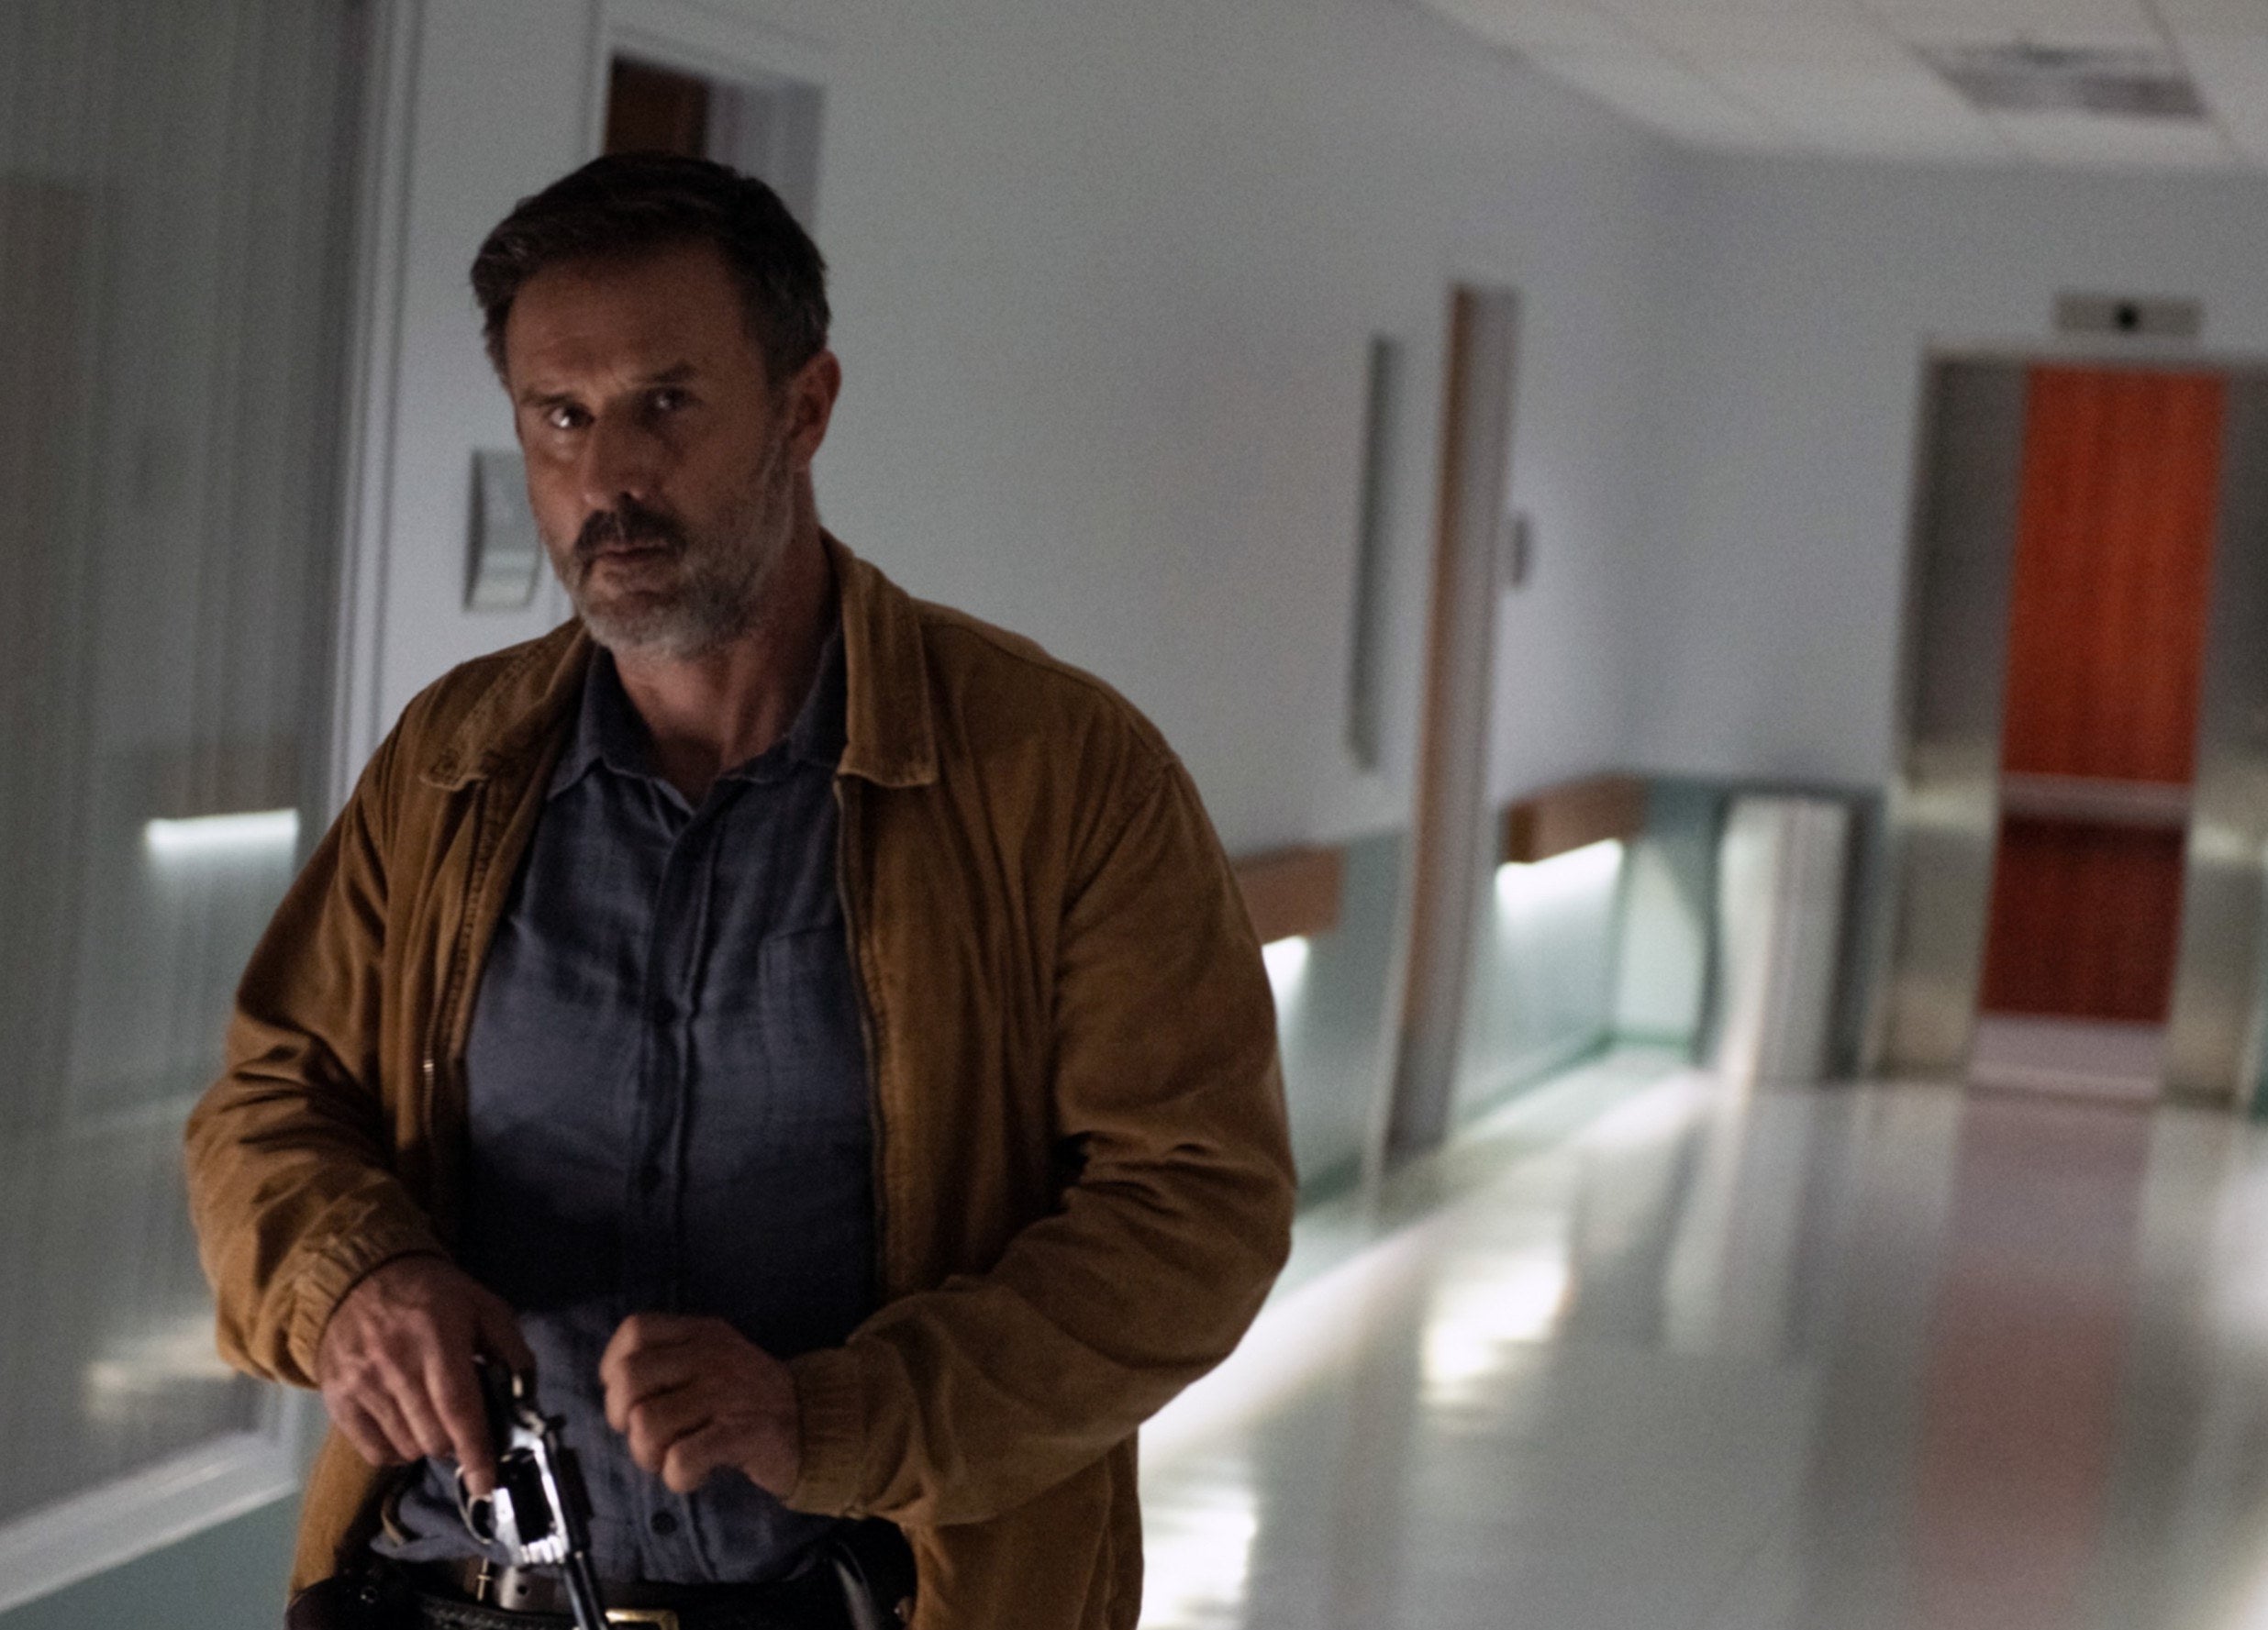 Dewey entering the hospital wielding a gun while in plains clothes